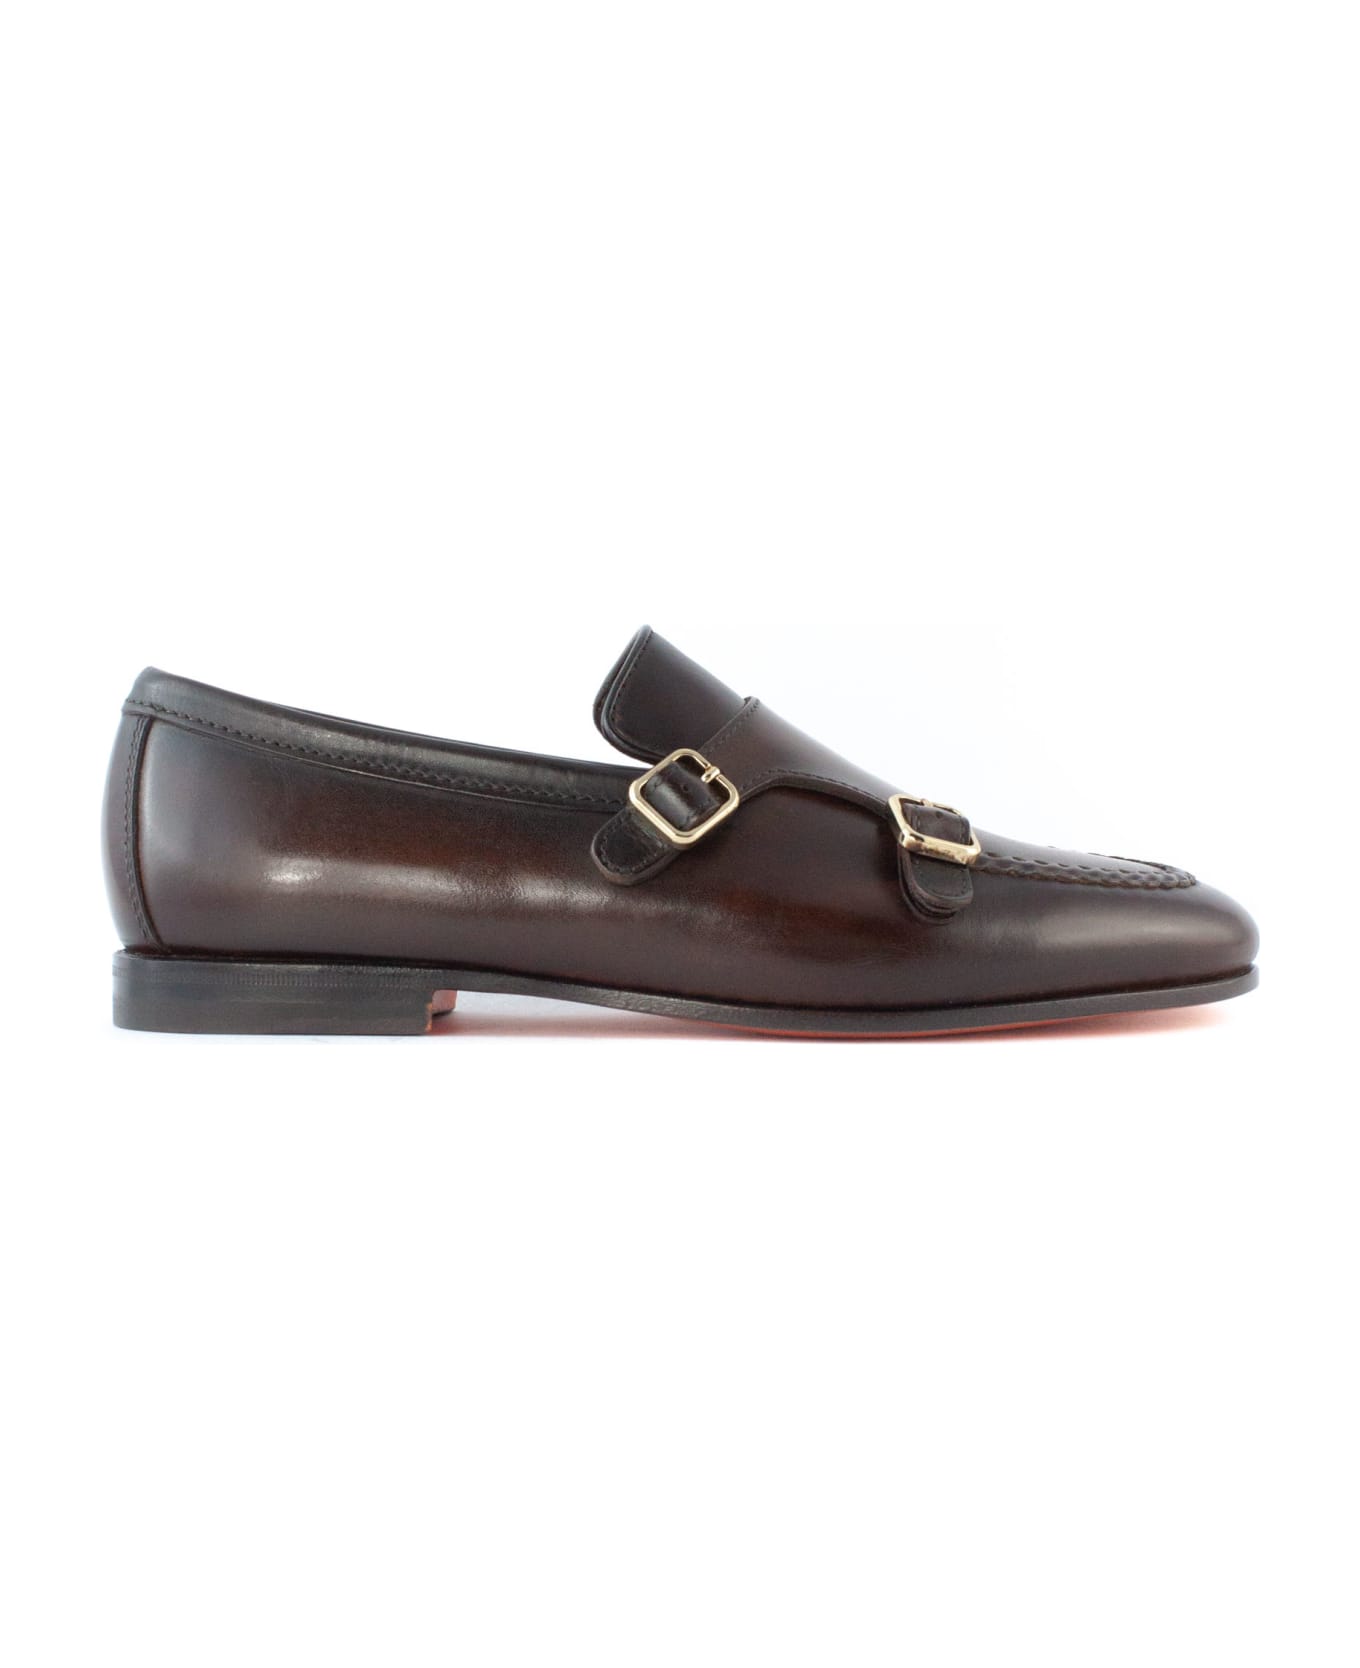 Santoni Brown Leather Double-buckle Loafer - Brown